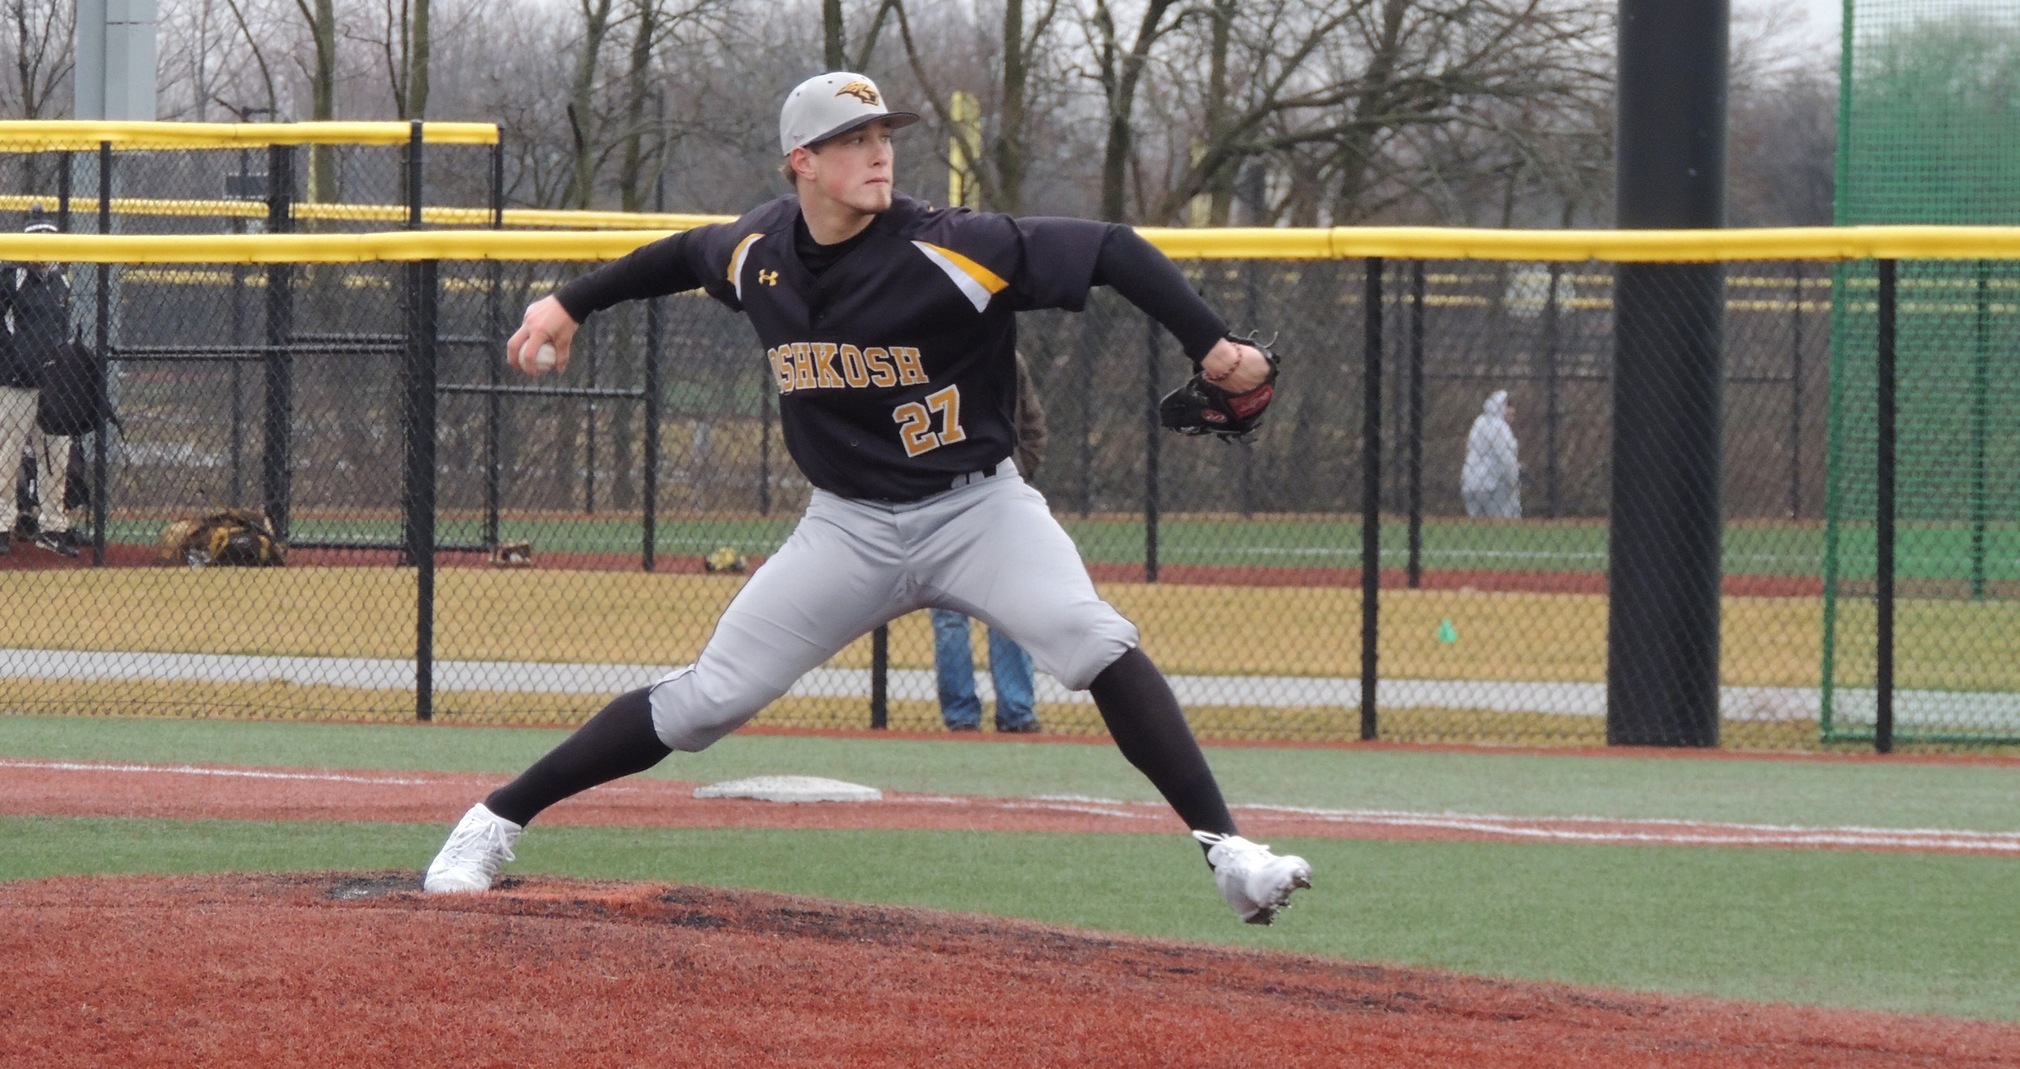 Colan Treml helped UW-Oshkosh defeat Transylvania University by striking out nine batters in seven innings pitched.